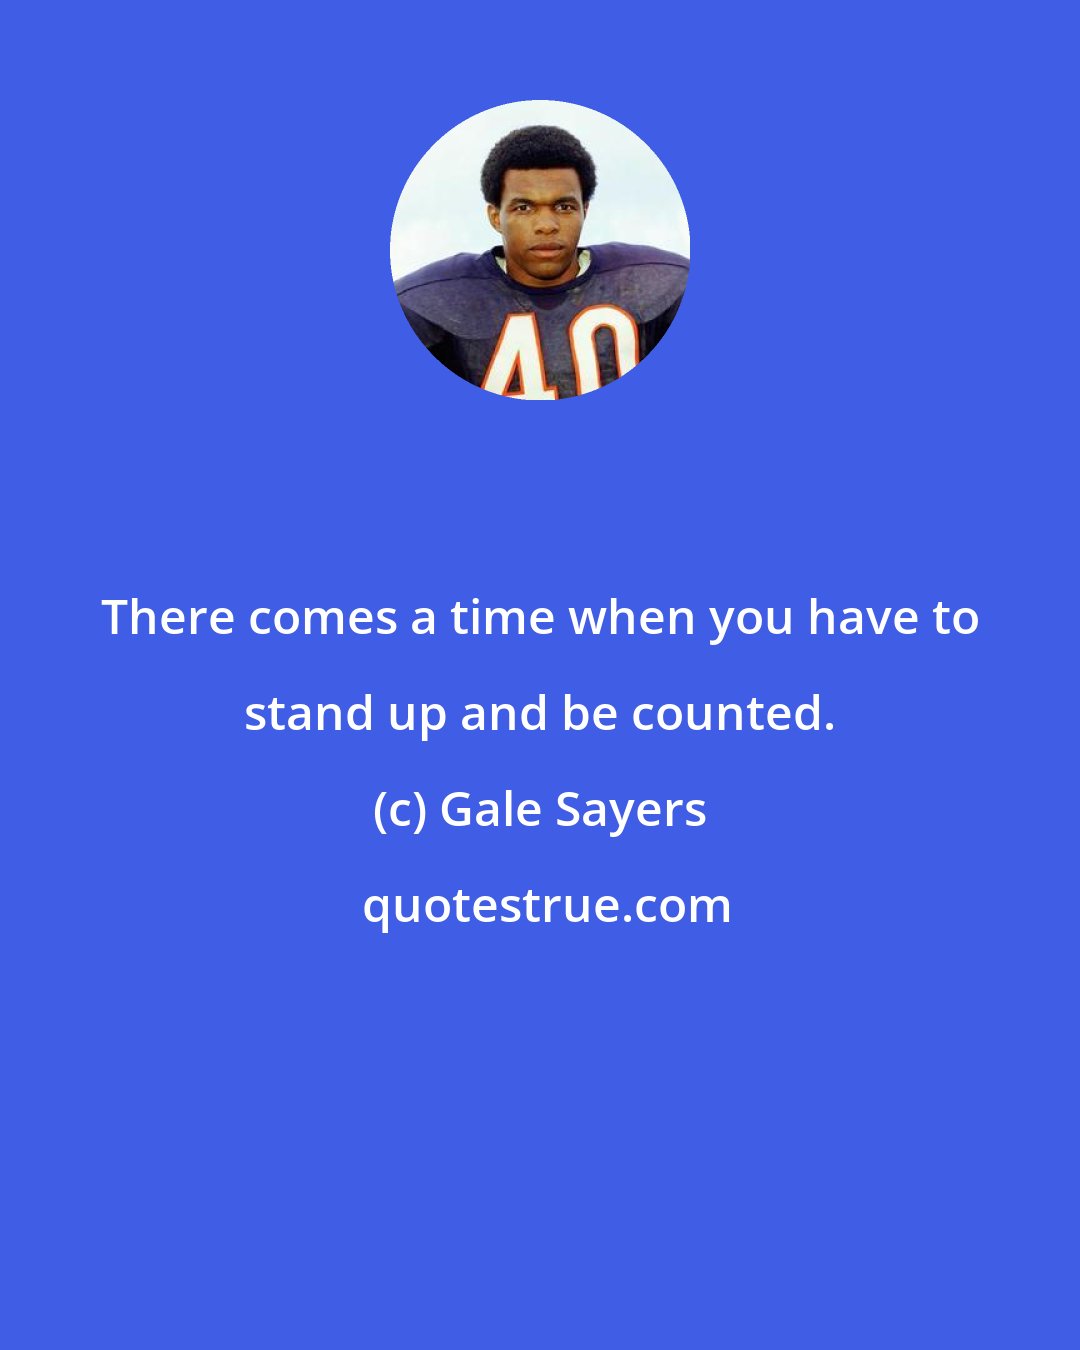 Gale Sayers: There comes a time when you have to stand up and be counted.